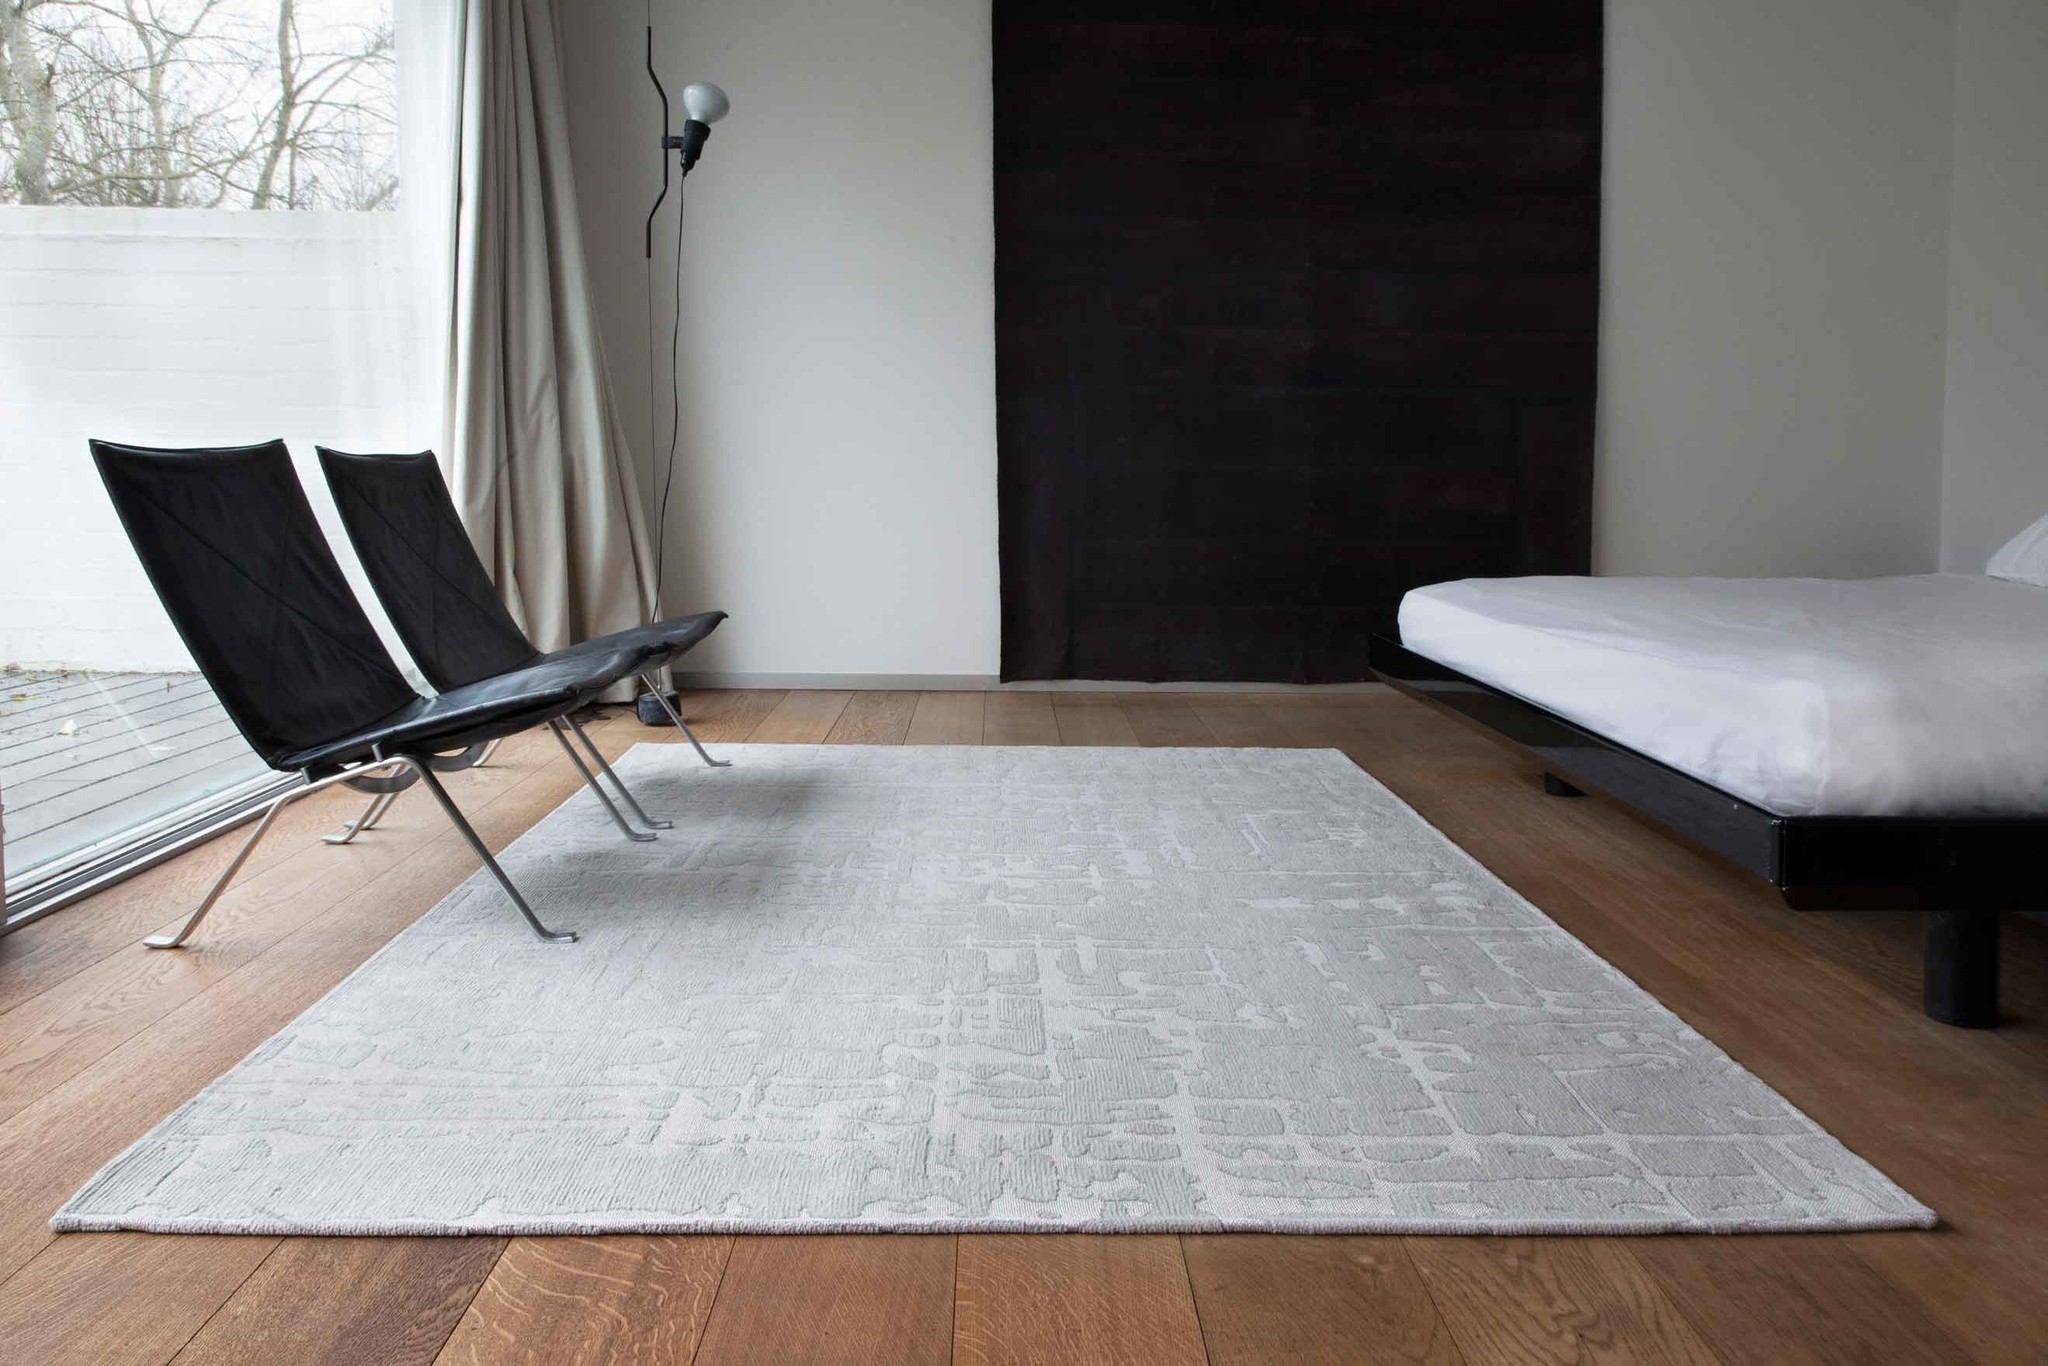 Abstract Silver Belgian Rug ☞ Size: 8' x 11' 2" (240 x 340 cm)